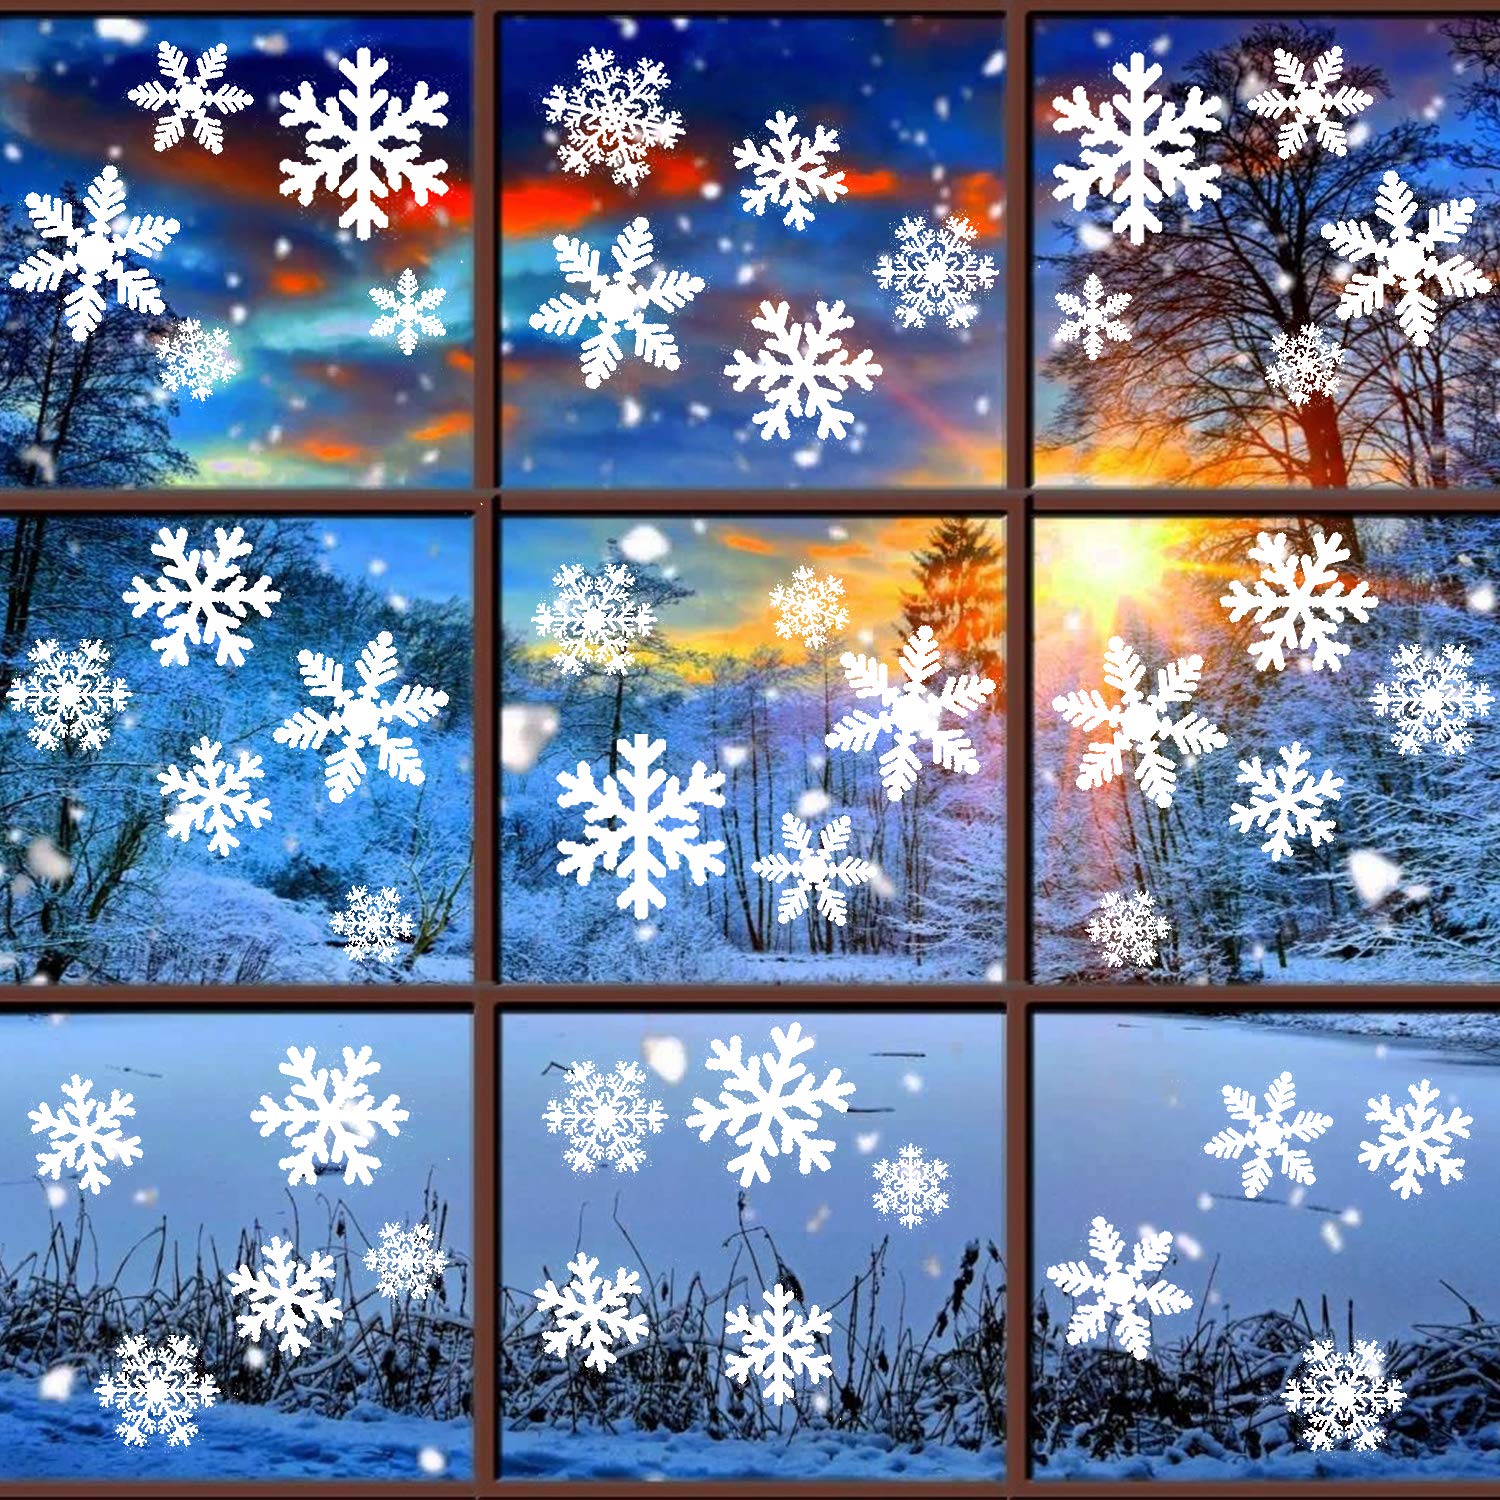 50pcs Christmas Snowflake Decorative Stickers Including Cartoon Car  Designs. Can Be Used For Window, Glass Door, Birthday Decoration, Graffiti,  Luggage, And Car/motorcycle/skateboard Waterproof Sticker